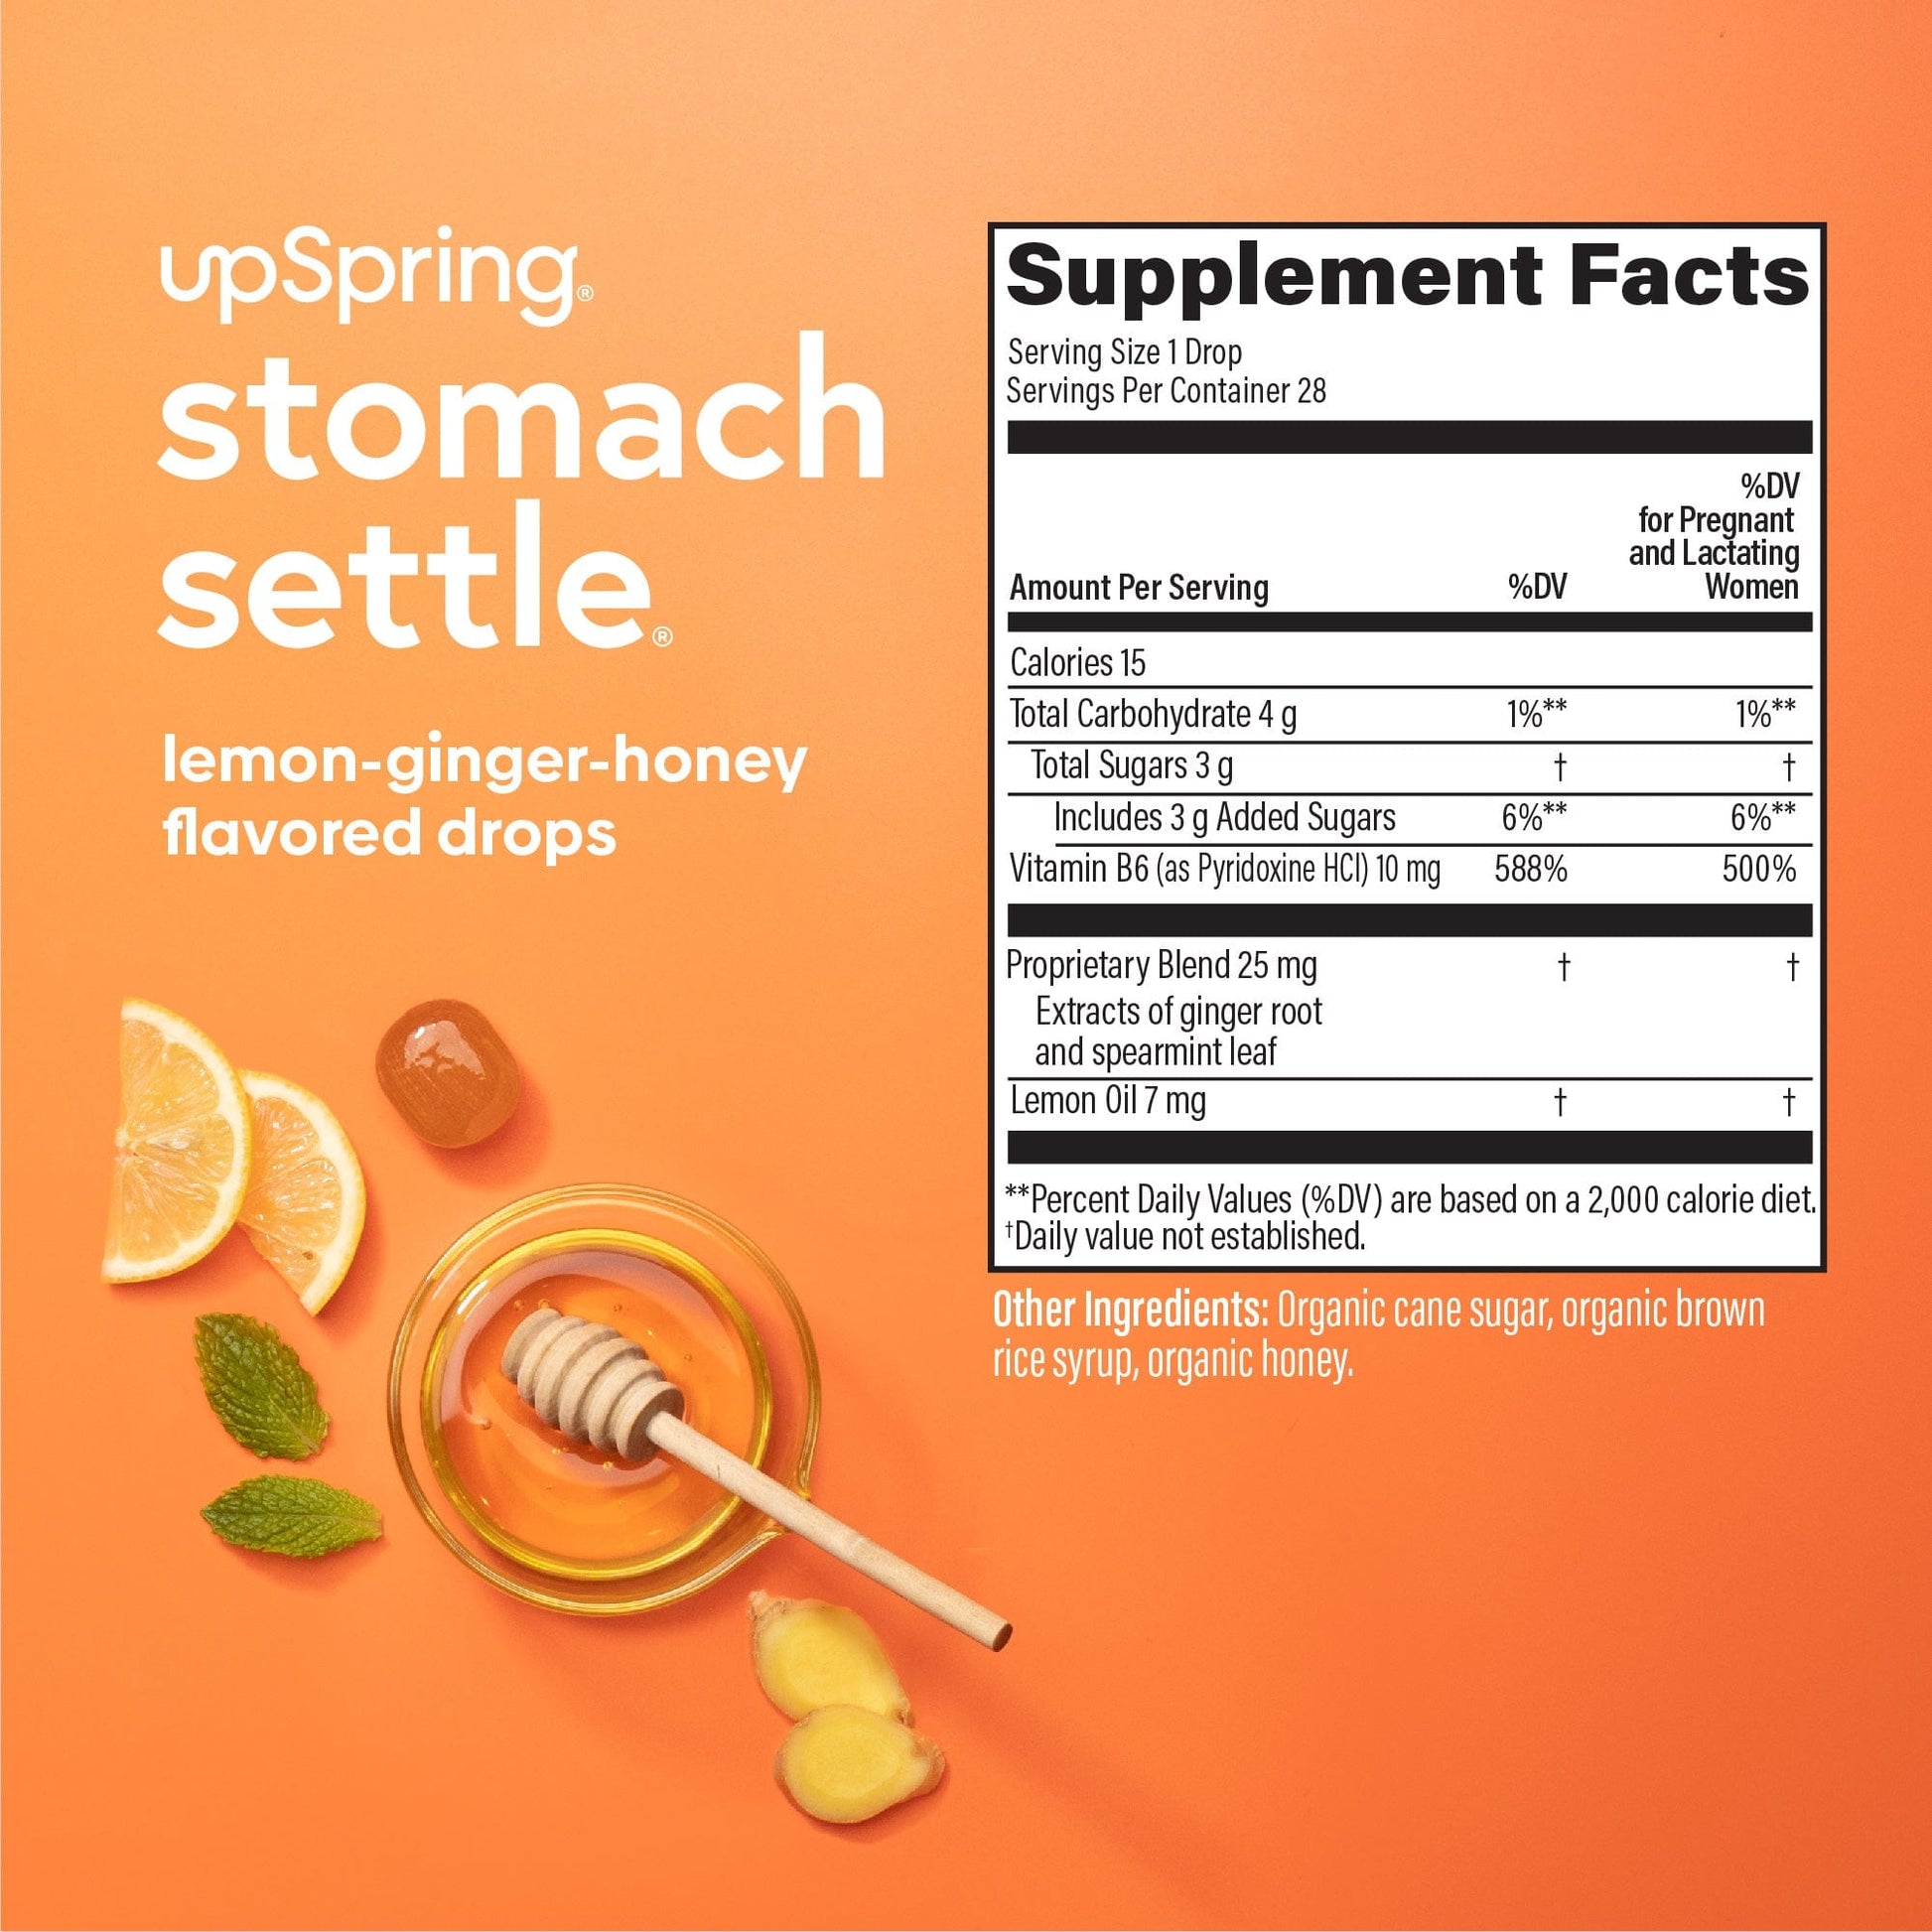 Supplement facts and ingredient information for Stomach Settle 